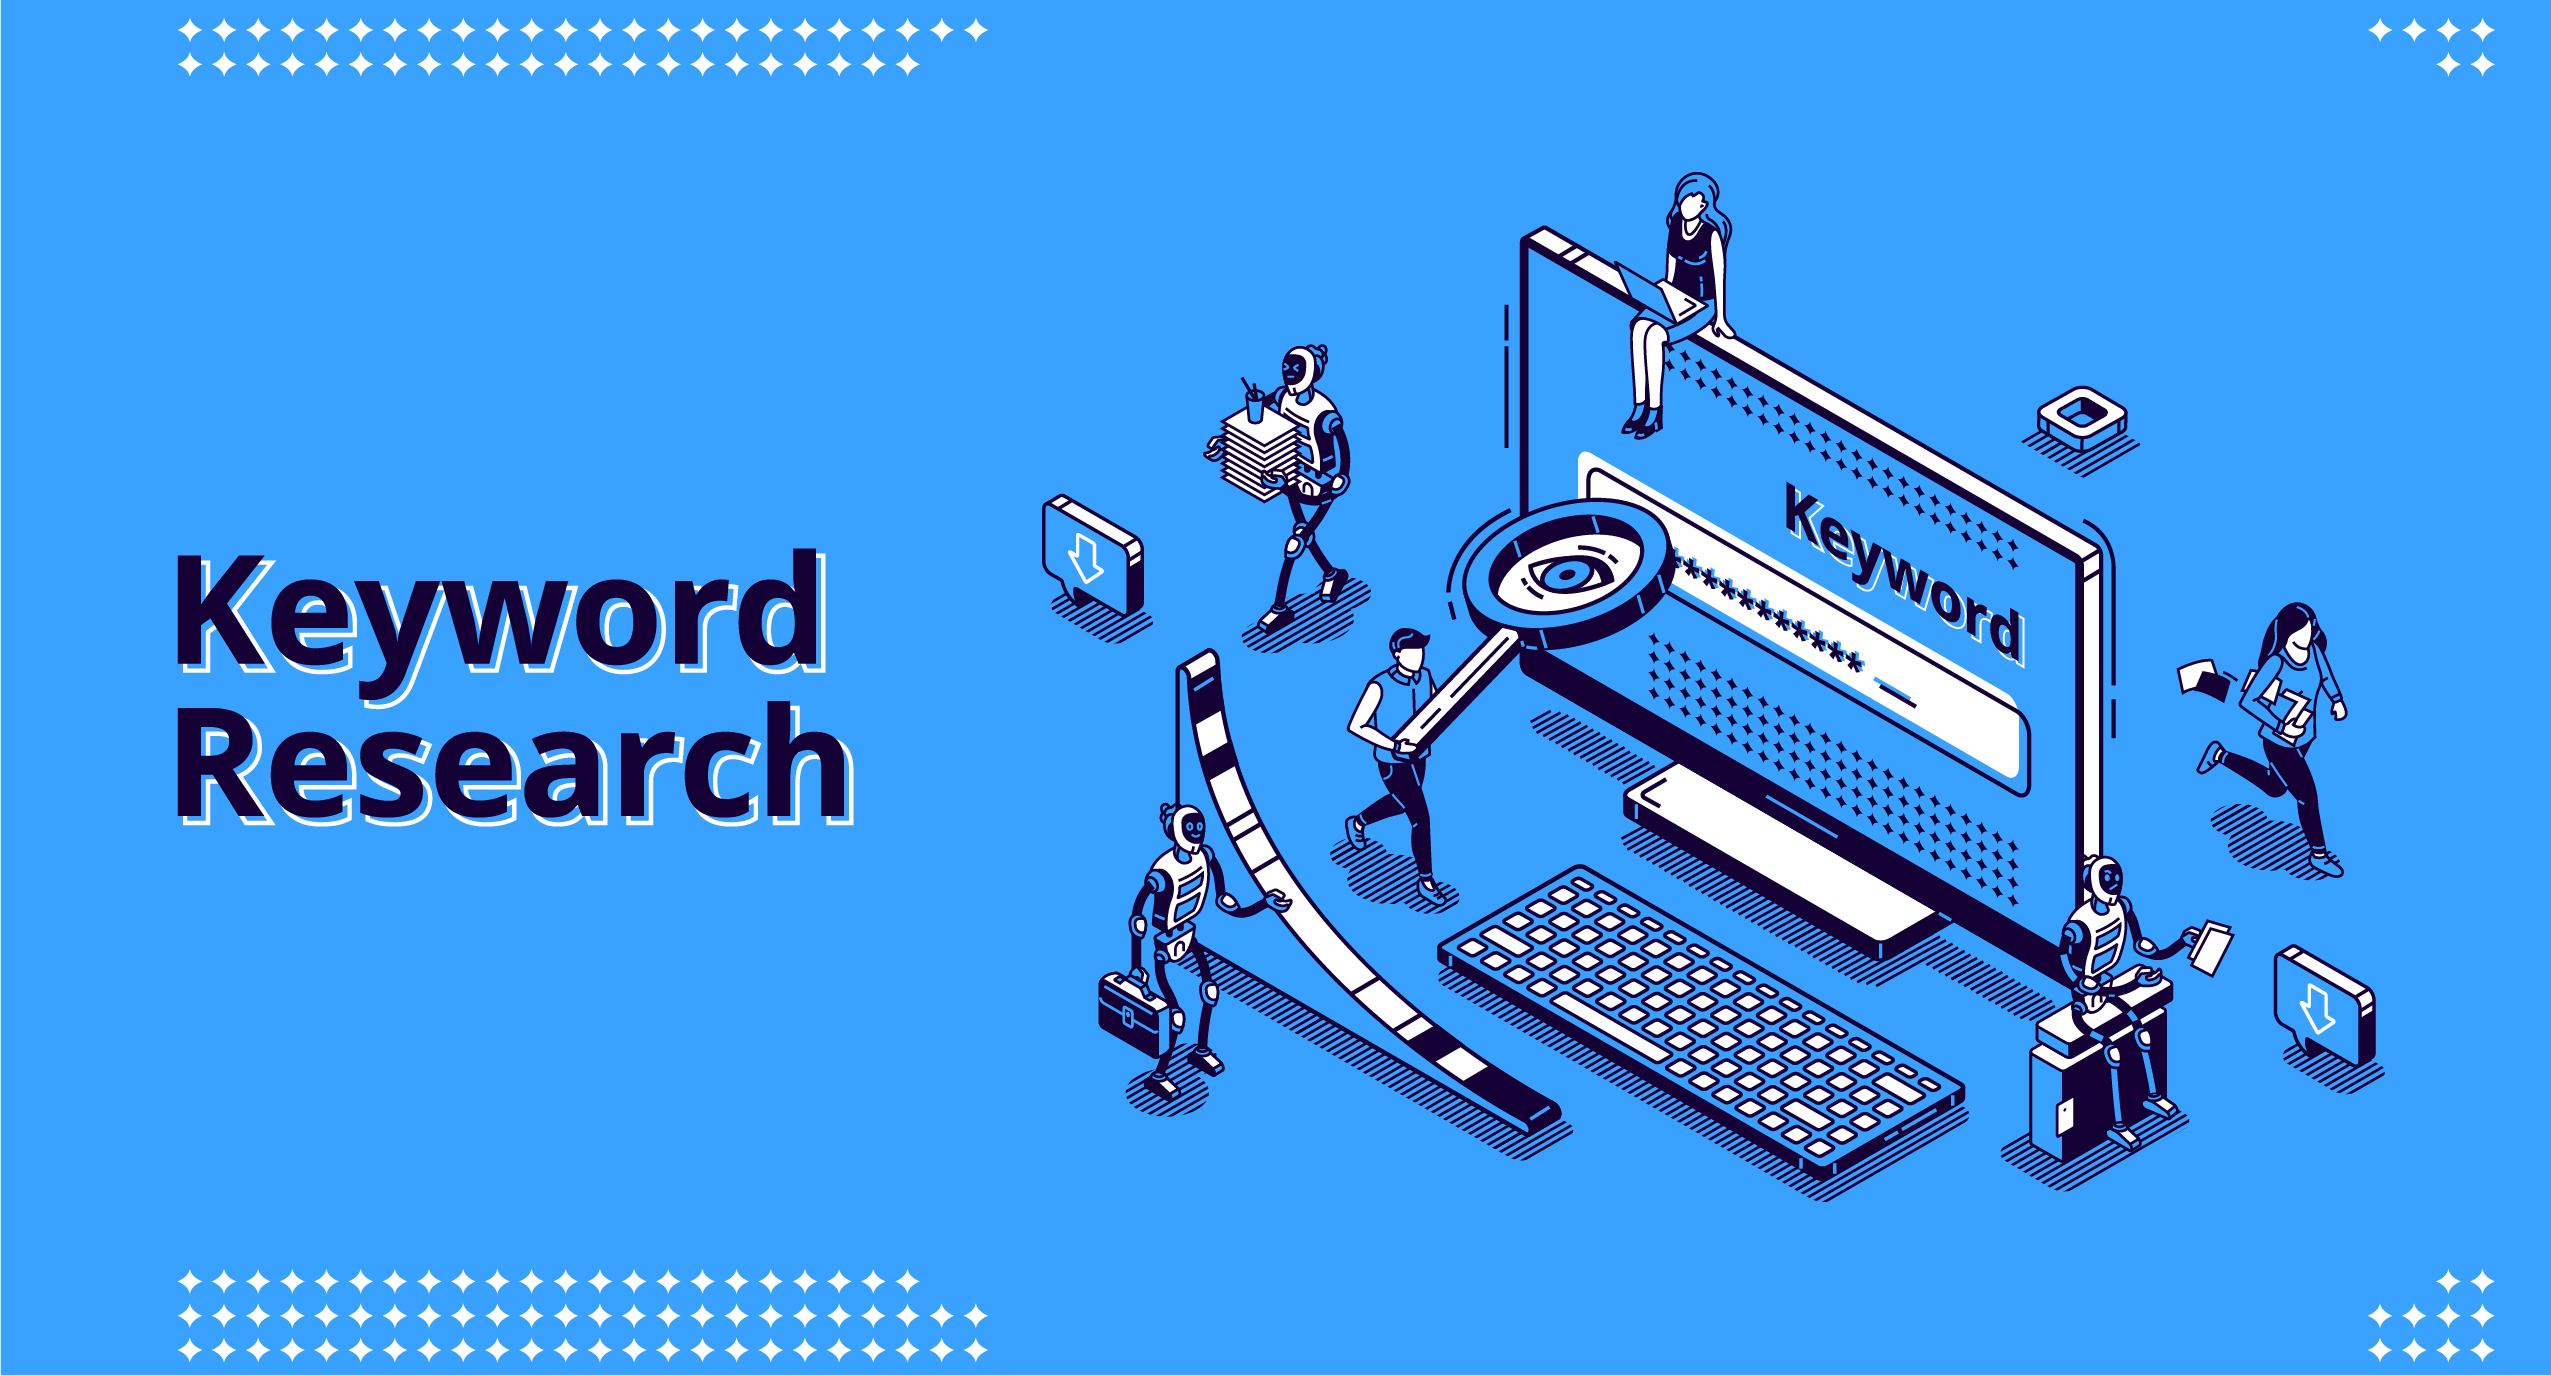 Conduct Keyword Research for Effective Content Optimization. he blog explores the importance of keywords in content writing and optimization, providing tips and best practices for using keywords effectively.